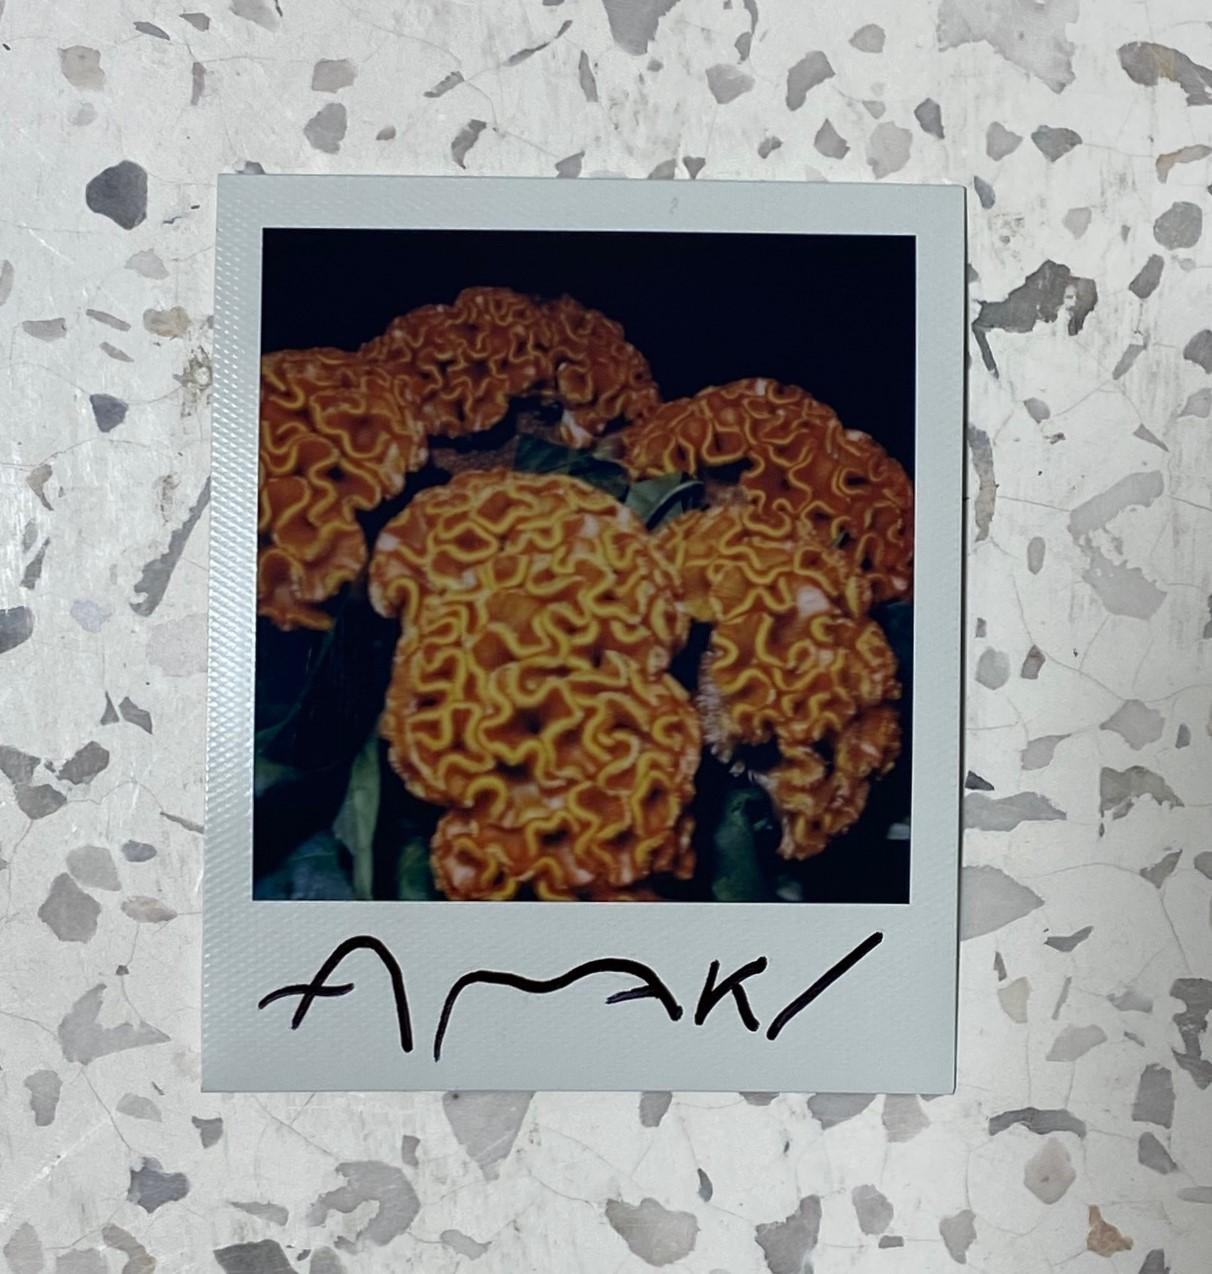 A very engaging, unique, and alluring work by famed Japanese photographer and contemporary artist Nobuyoshi Araki from his 1990s flower series.

This original one-of-a-kind polaroid photographic print is double hand-signed in marker in the lower